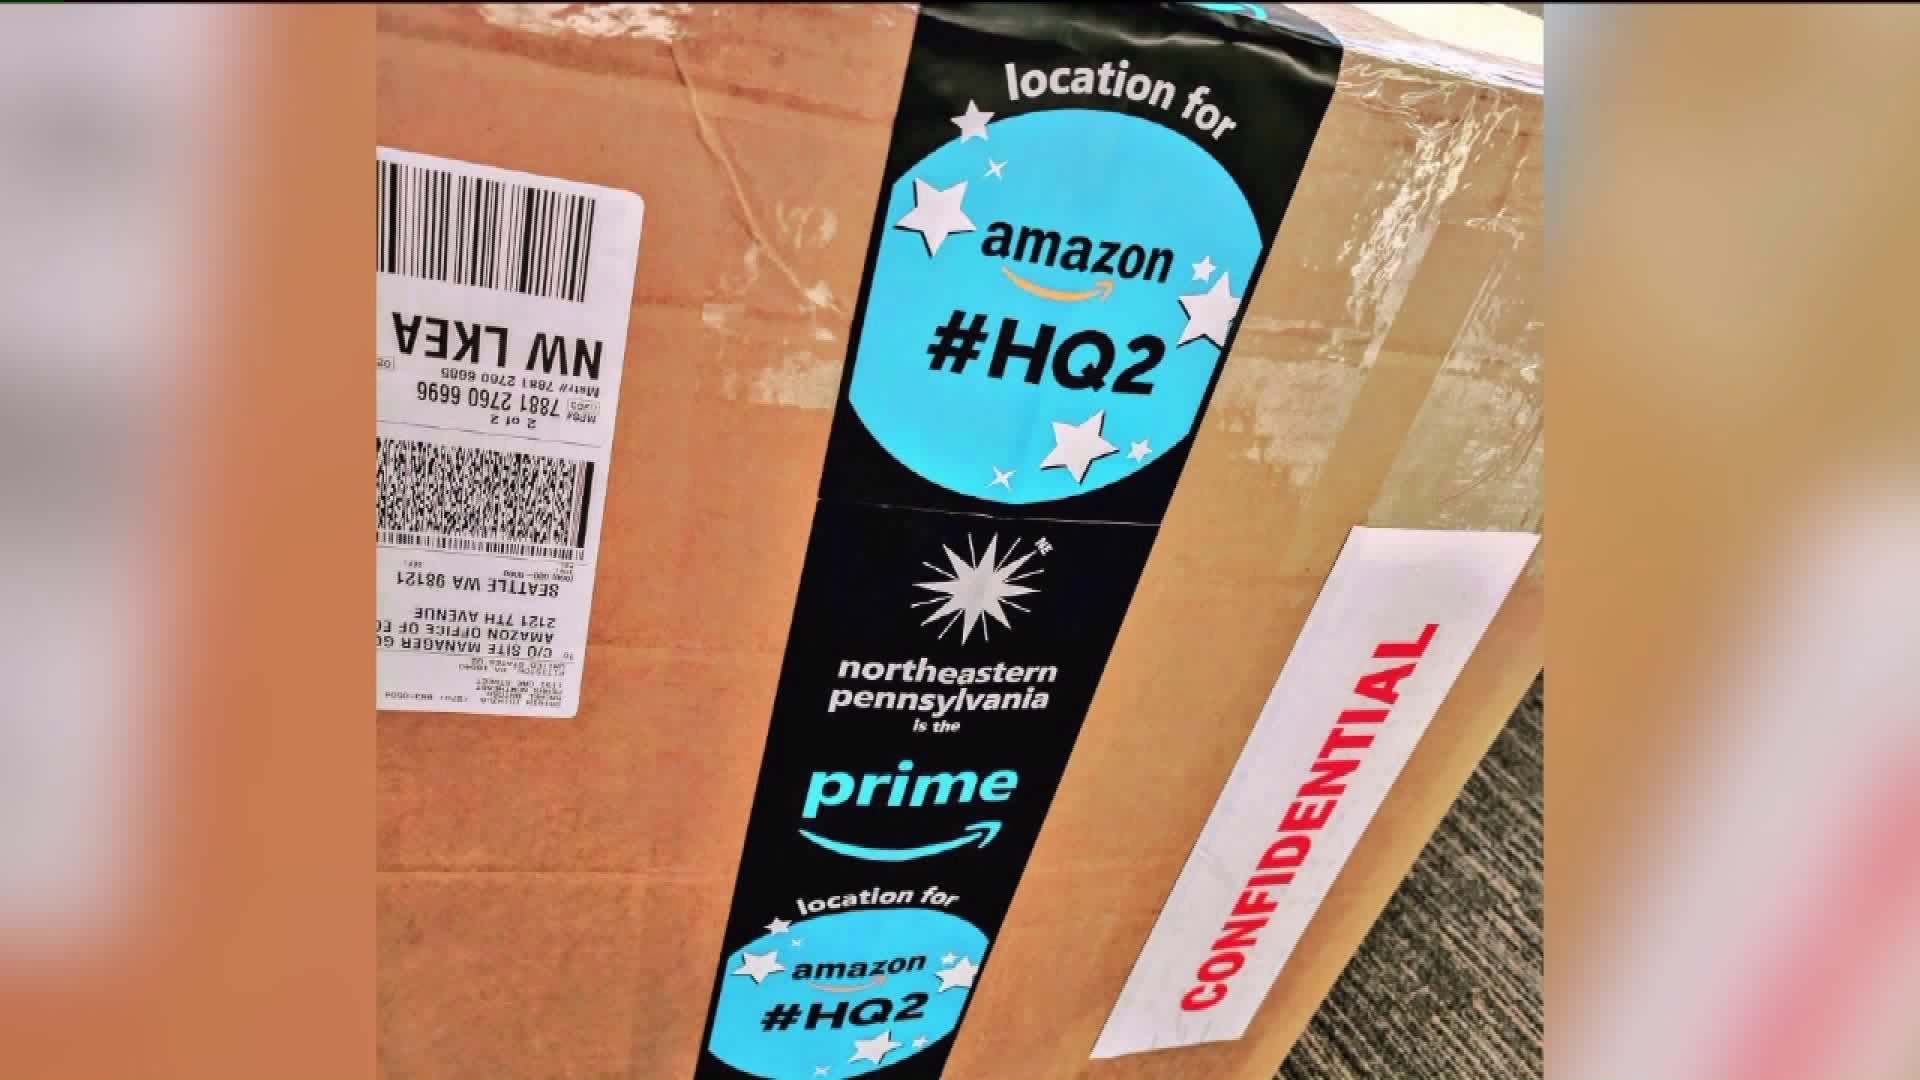 Could NEPA Be Amazon`s New HQ2?